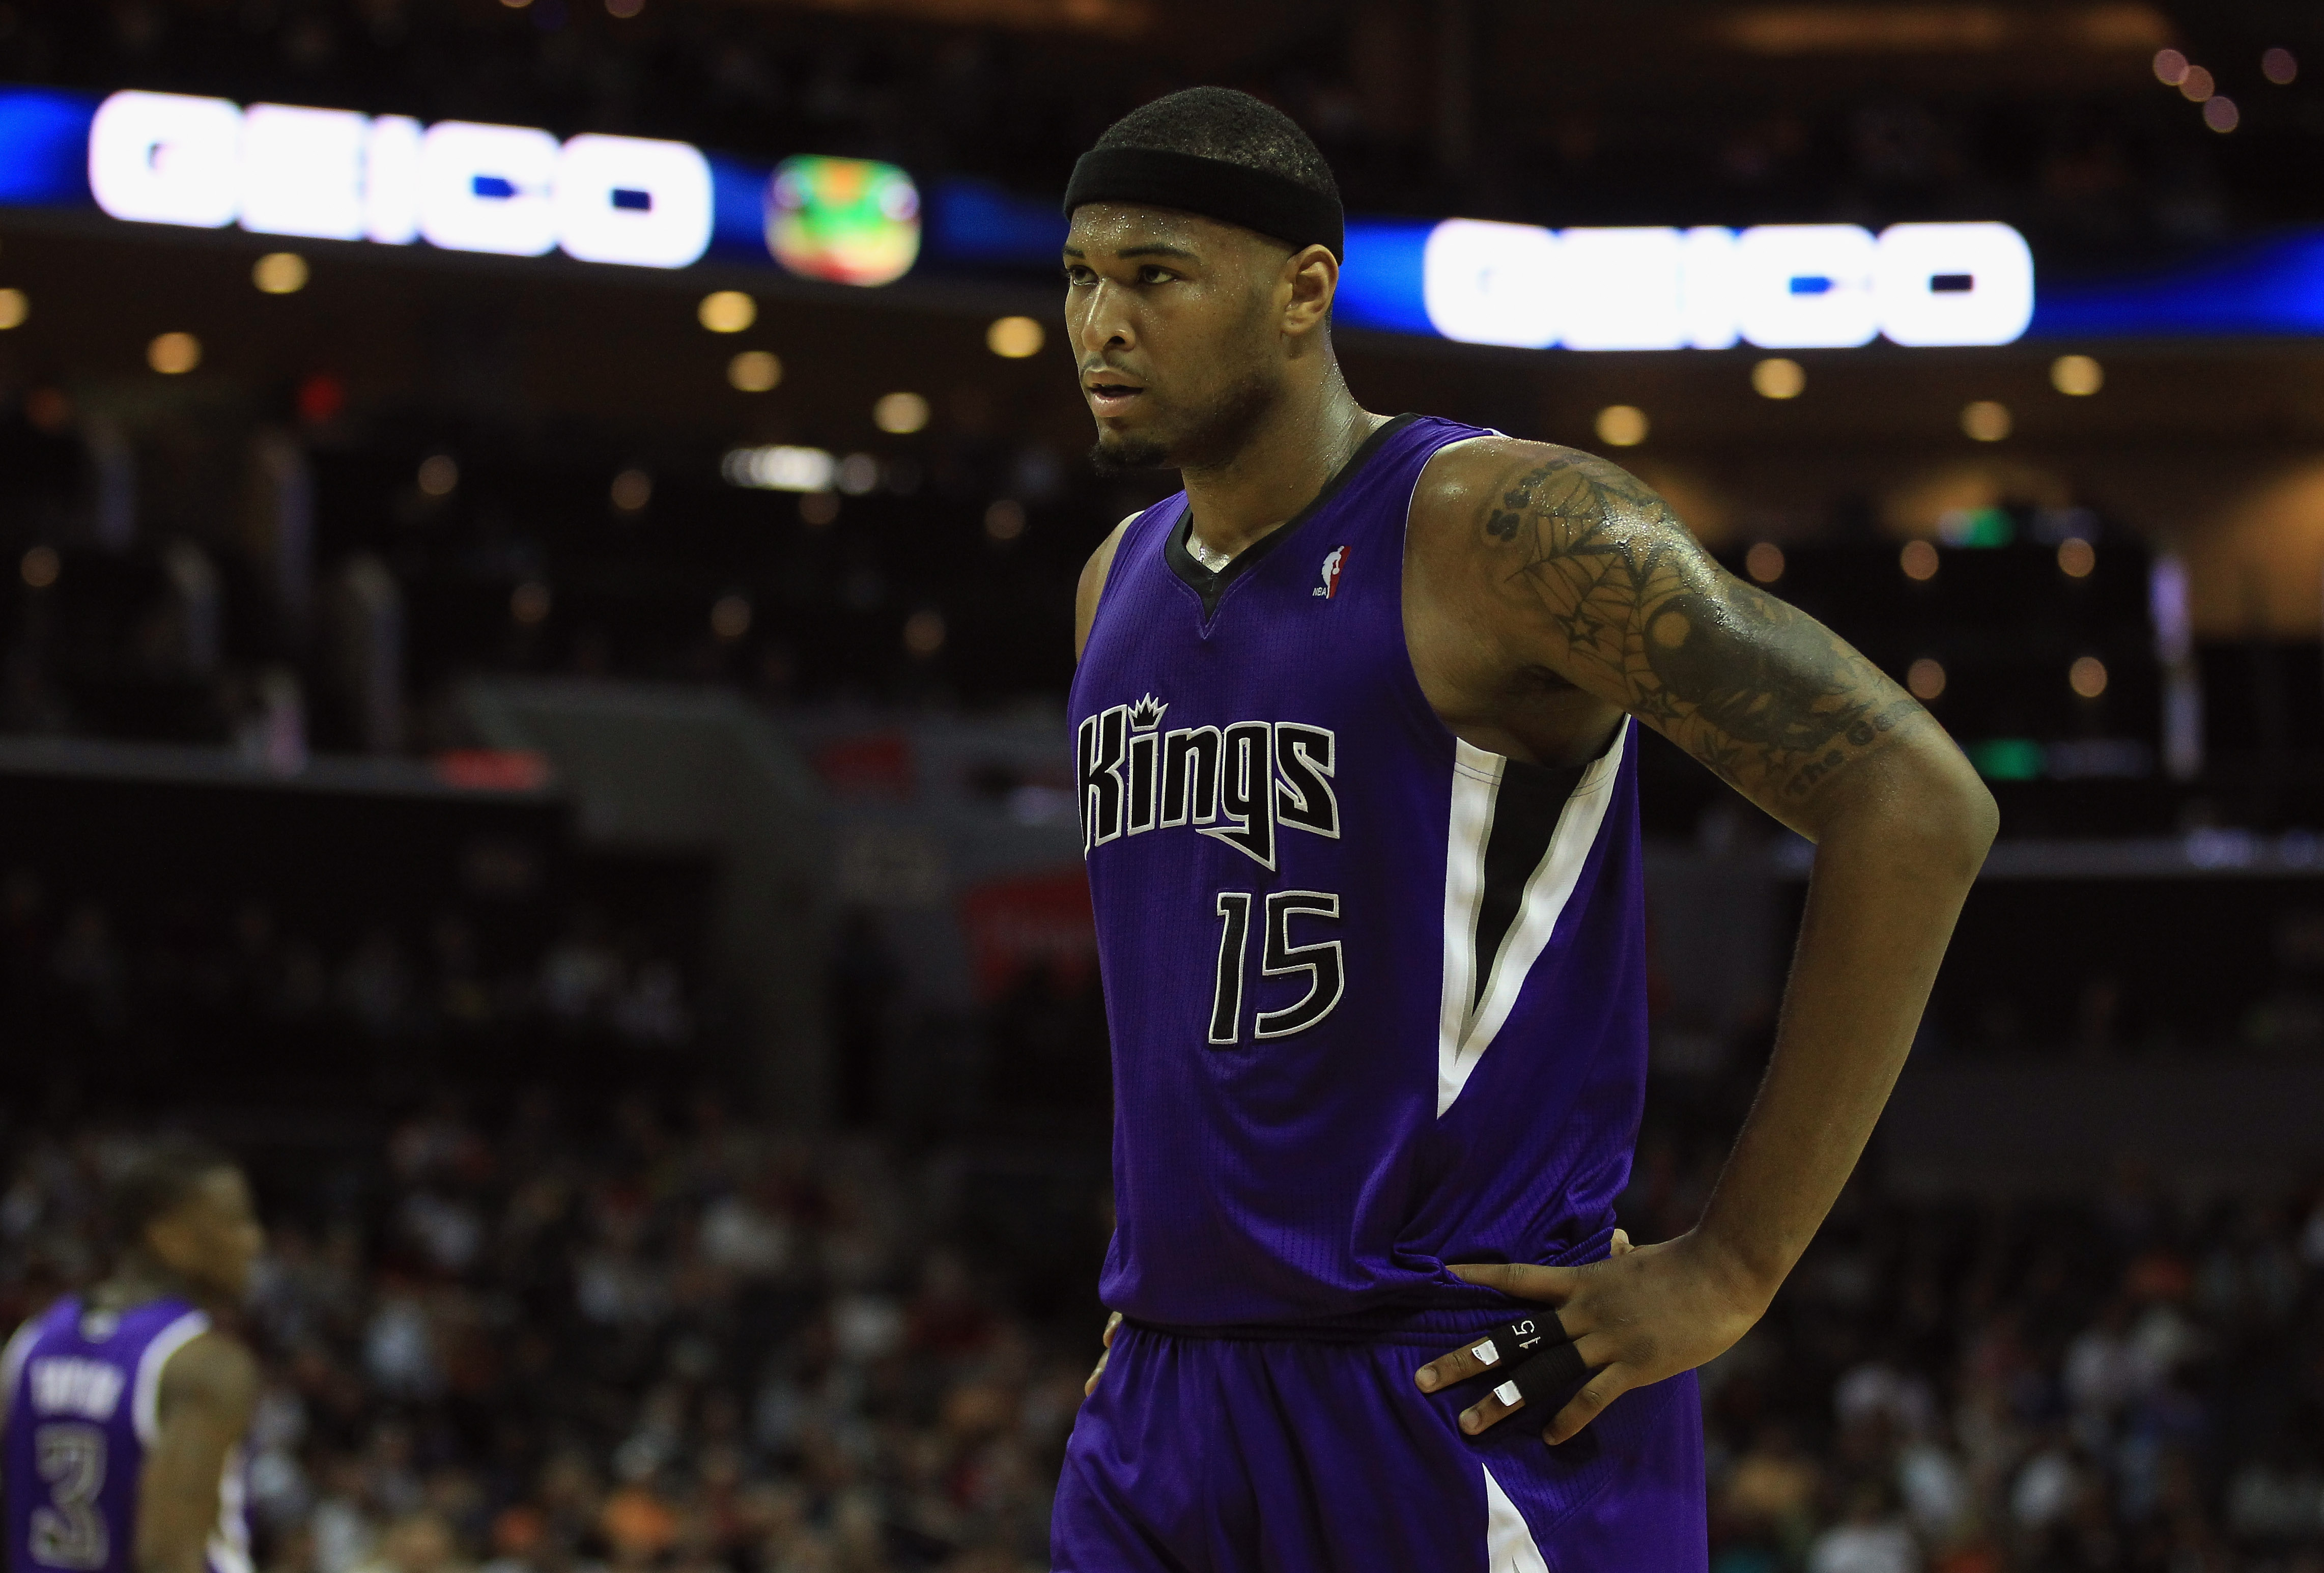 CHARLOTTE, NC - FEBRUARY 25:  DeMarcus Cousins #15 of the Sacramento Kings reacts to a call against the Charlotte Bobcats during their game at Time Warner Cable Arena on February 25, 2011 in Charlotte, North Carolina. NOTE TO USER: User expressly acknowle